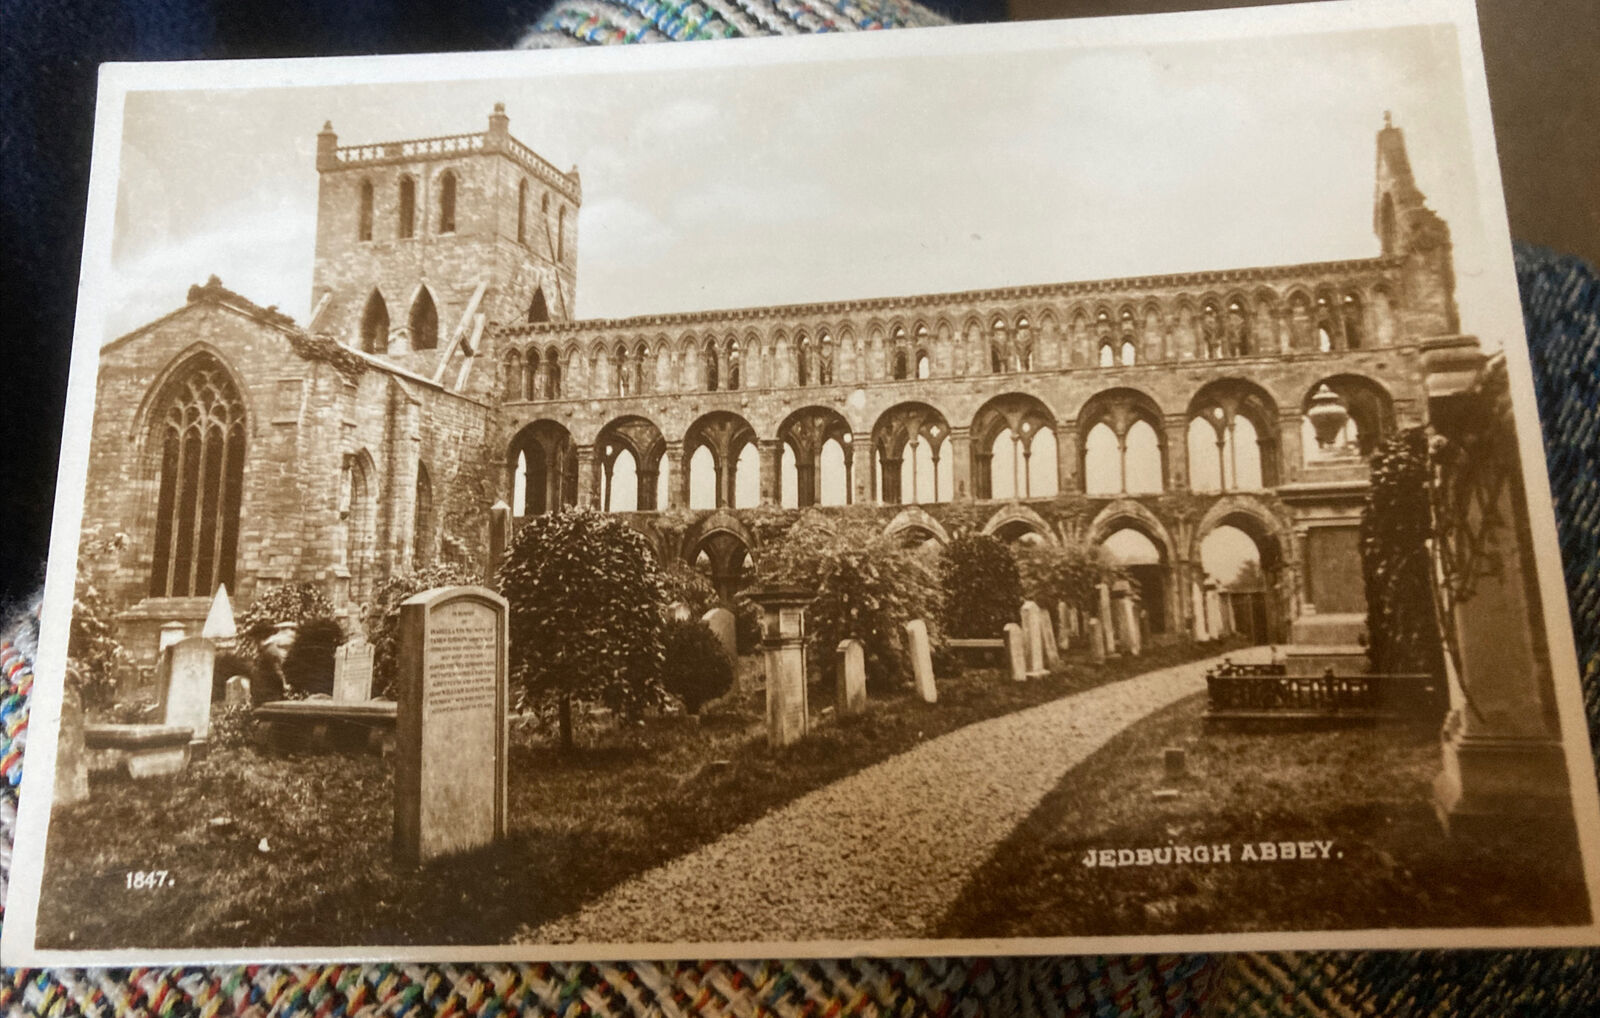 House Clearance - Collectable, Vintage Service Of Jedburgh Abbey  - Black/white